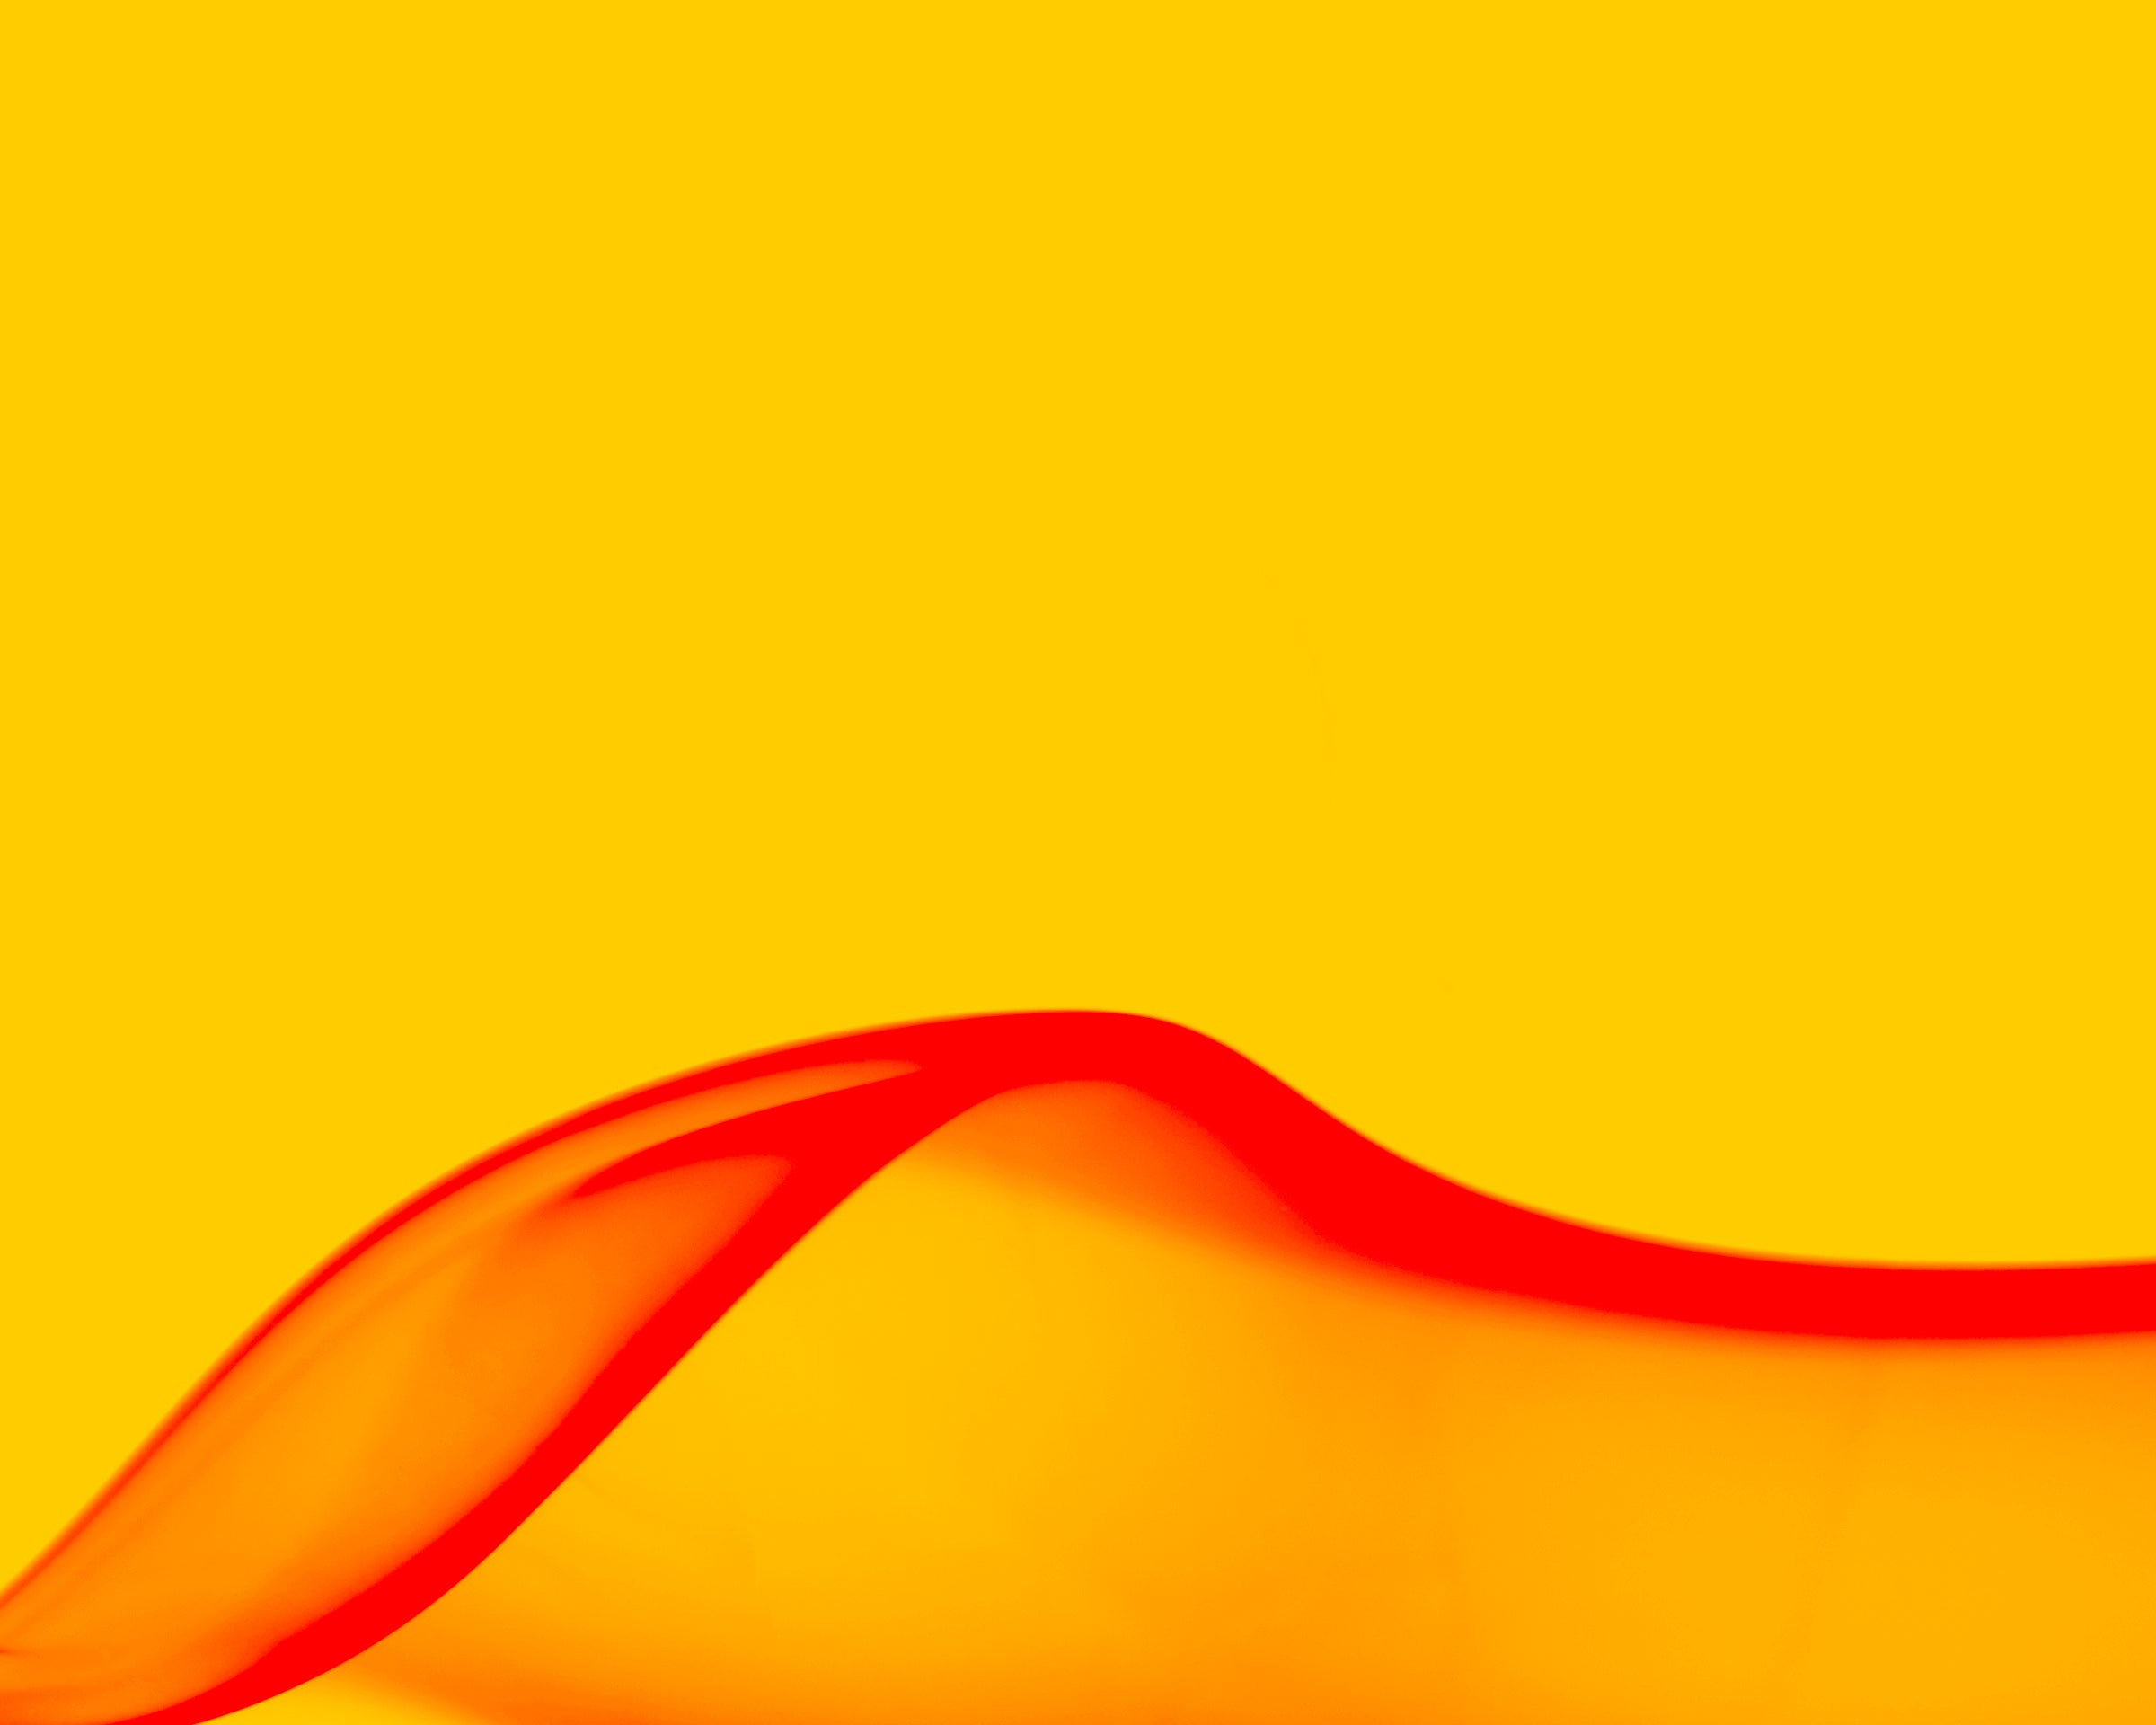 abstract red wave at the bottom on yellow overall, photo art 